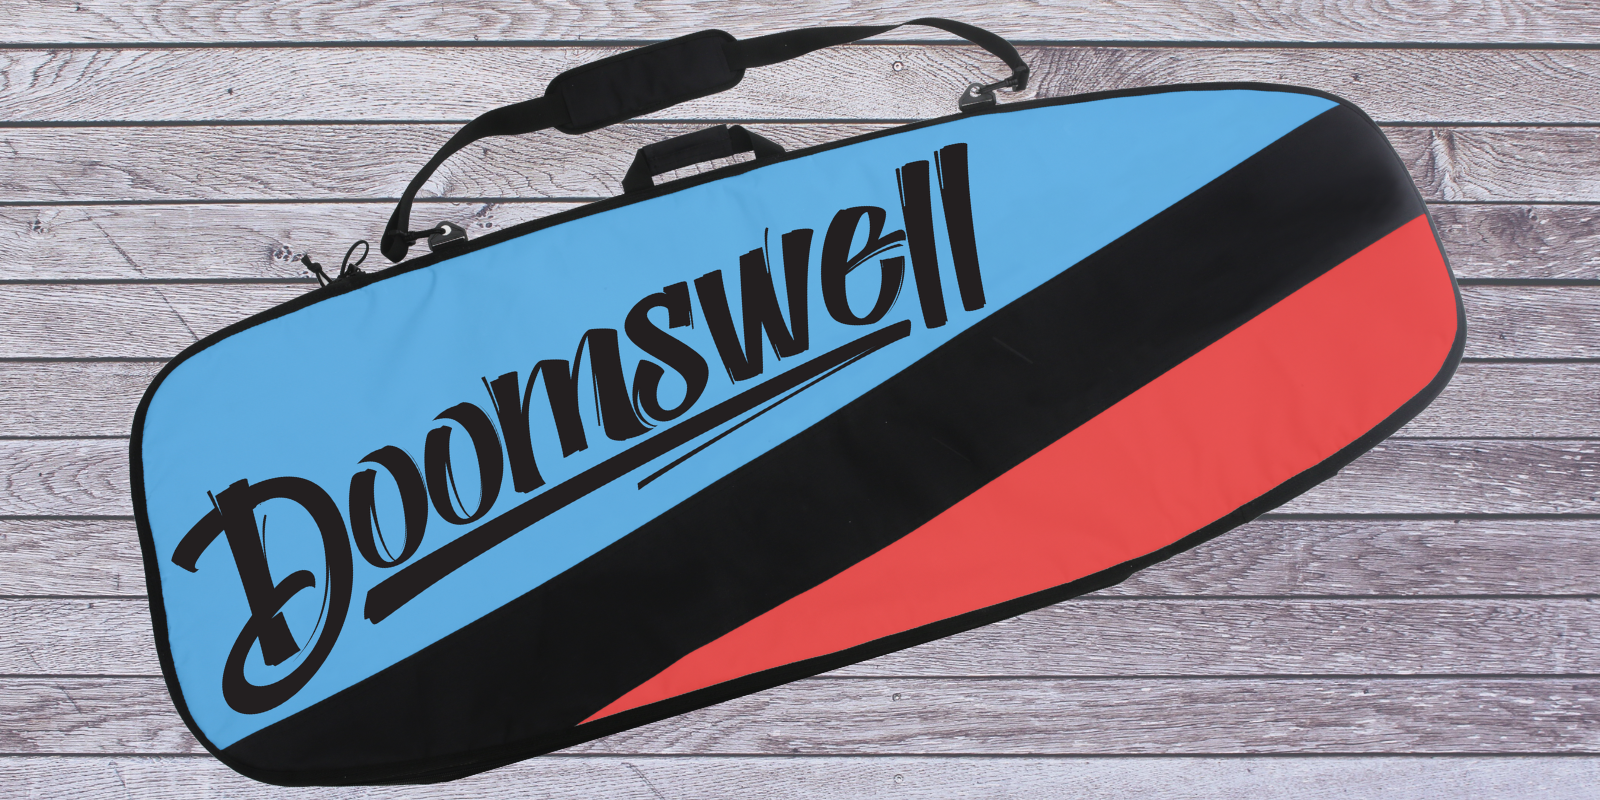 DOOMSWELL BOARD BAG UP TO 4FT-10IN 